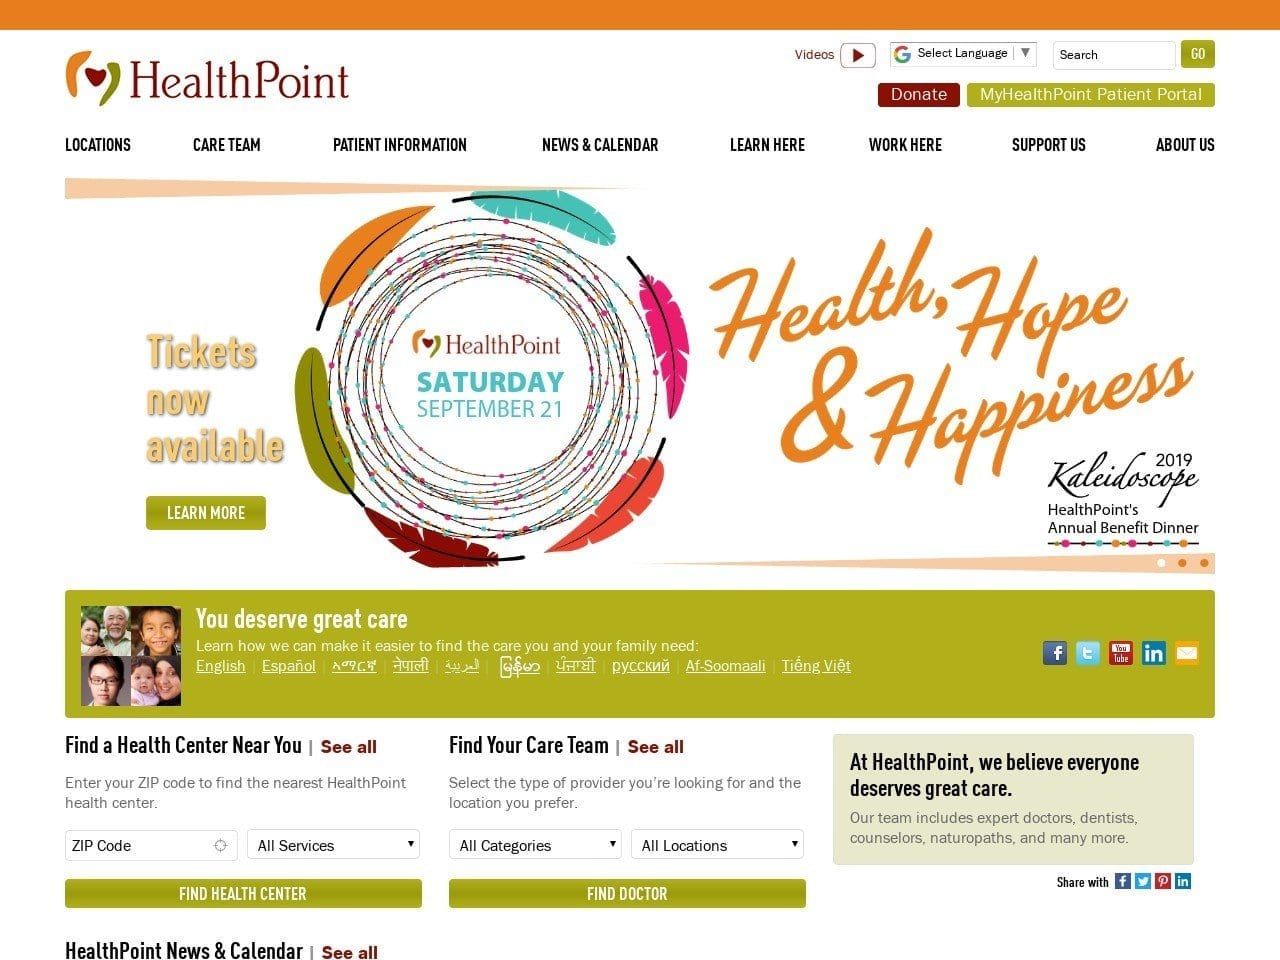 HealthPoint Website Screenshot from healthpointchc.org